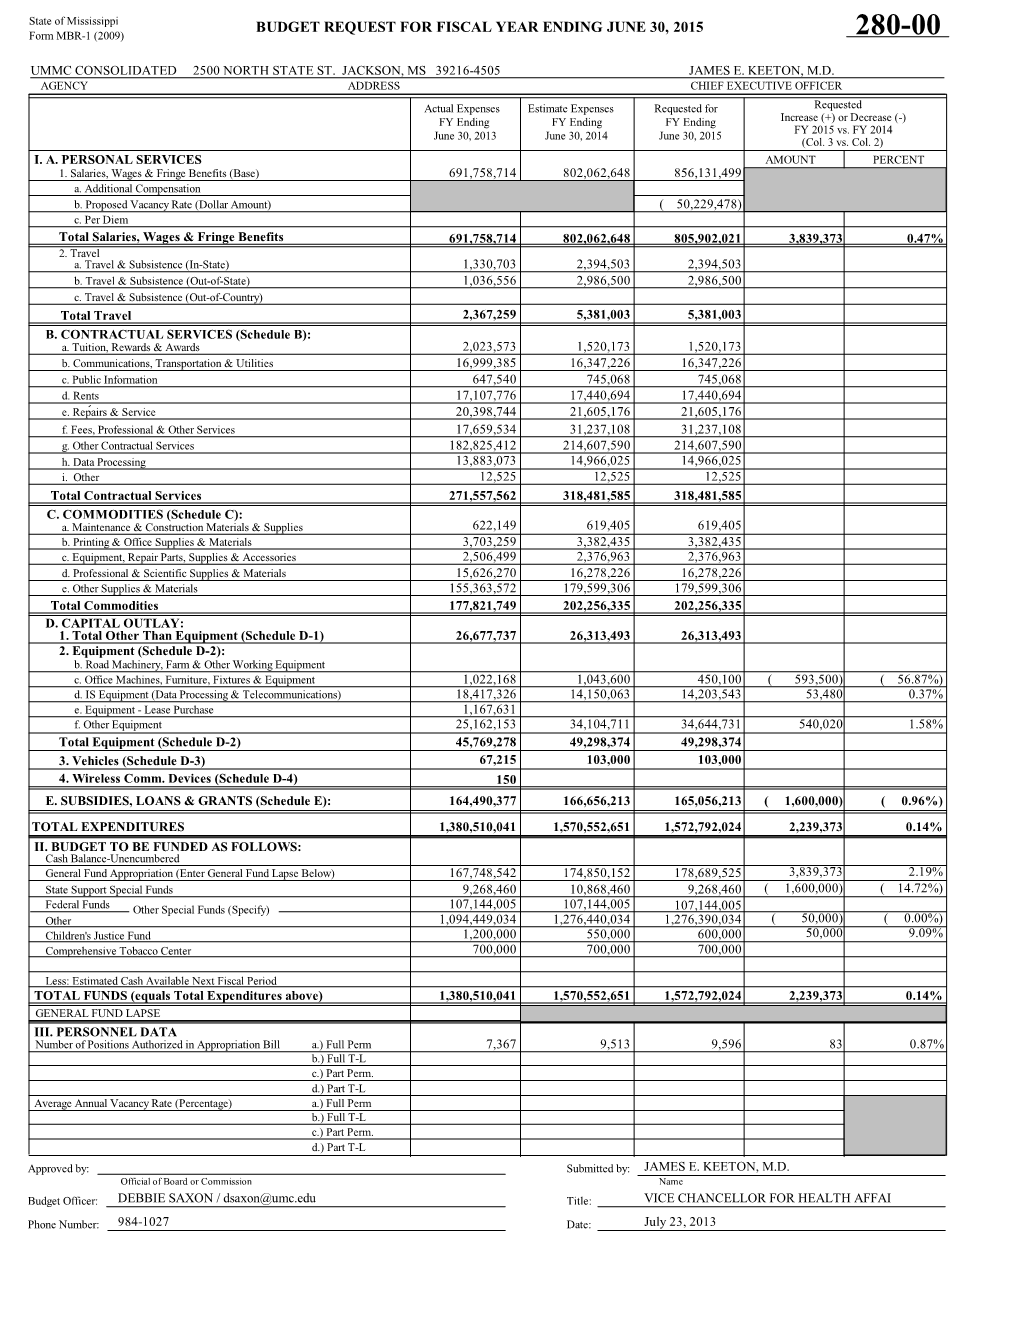 BUDGET REQUEST for FISCAL YEAR ENDING JUNE 30, 2015 Form MBR-1 (2009) 280-00